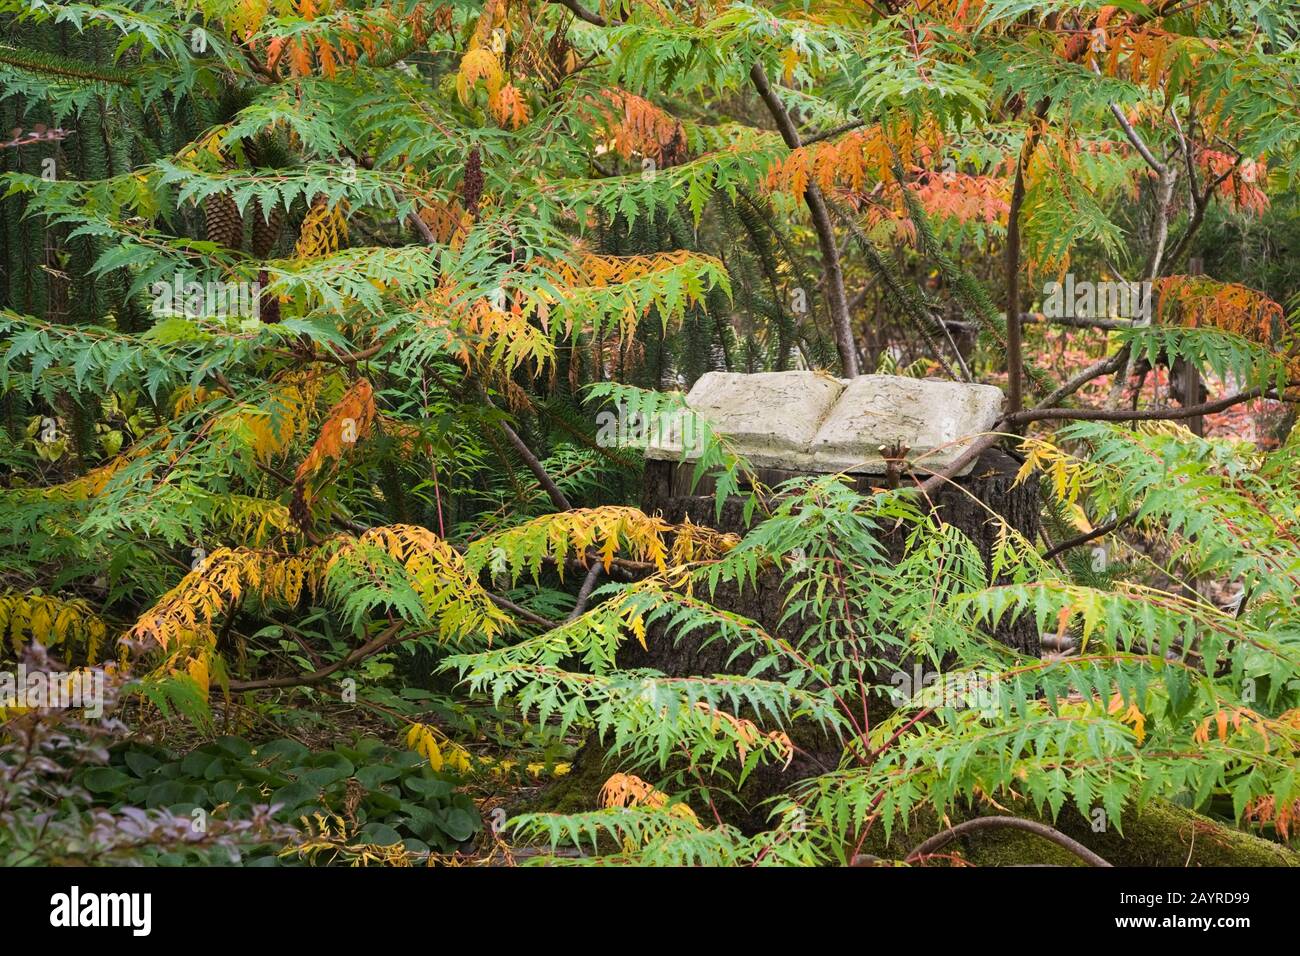 Rhus glabra 'Laciniata' - Sumac tree and an opened cement reading book sculpture in backyard garden in autumn. Stock Photo